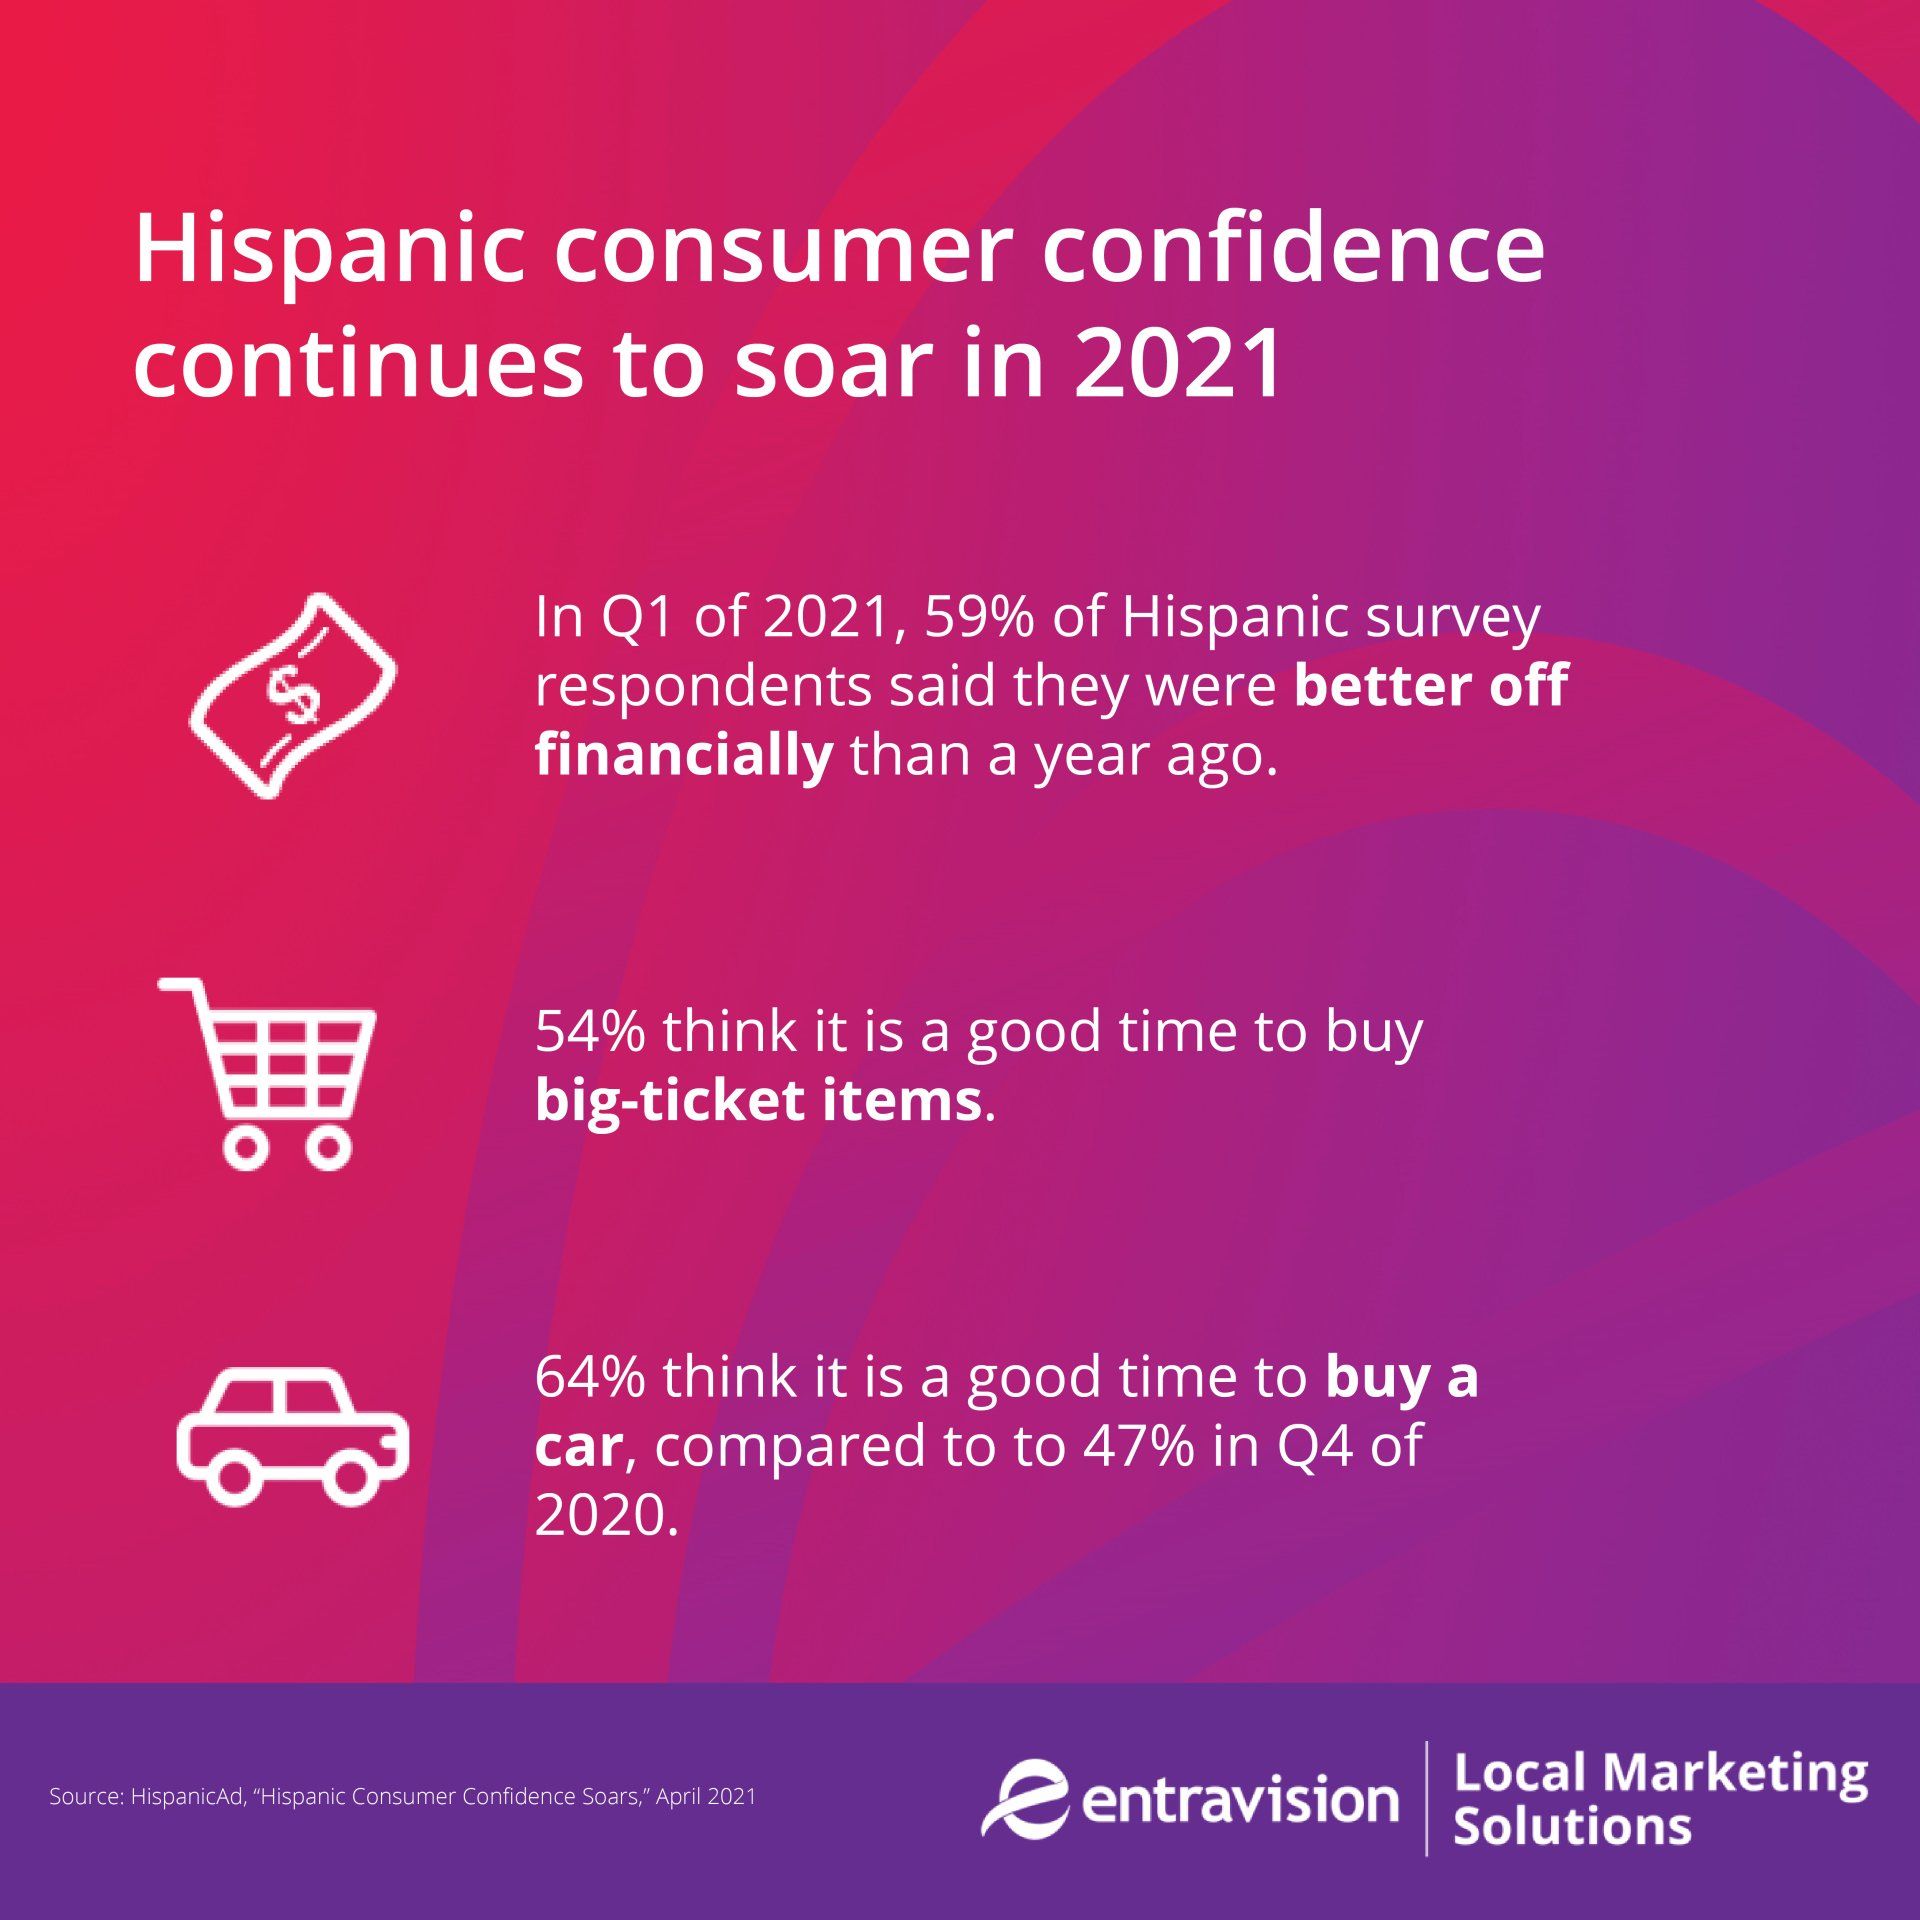 An infographic shows that Hispanic marketing is booming in 2021, with Hispanics agreeing that they are in a good place financially to buy big-ticket items. Small business marketing that includes Hispanic audiences is key!